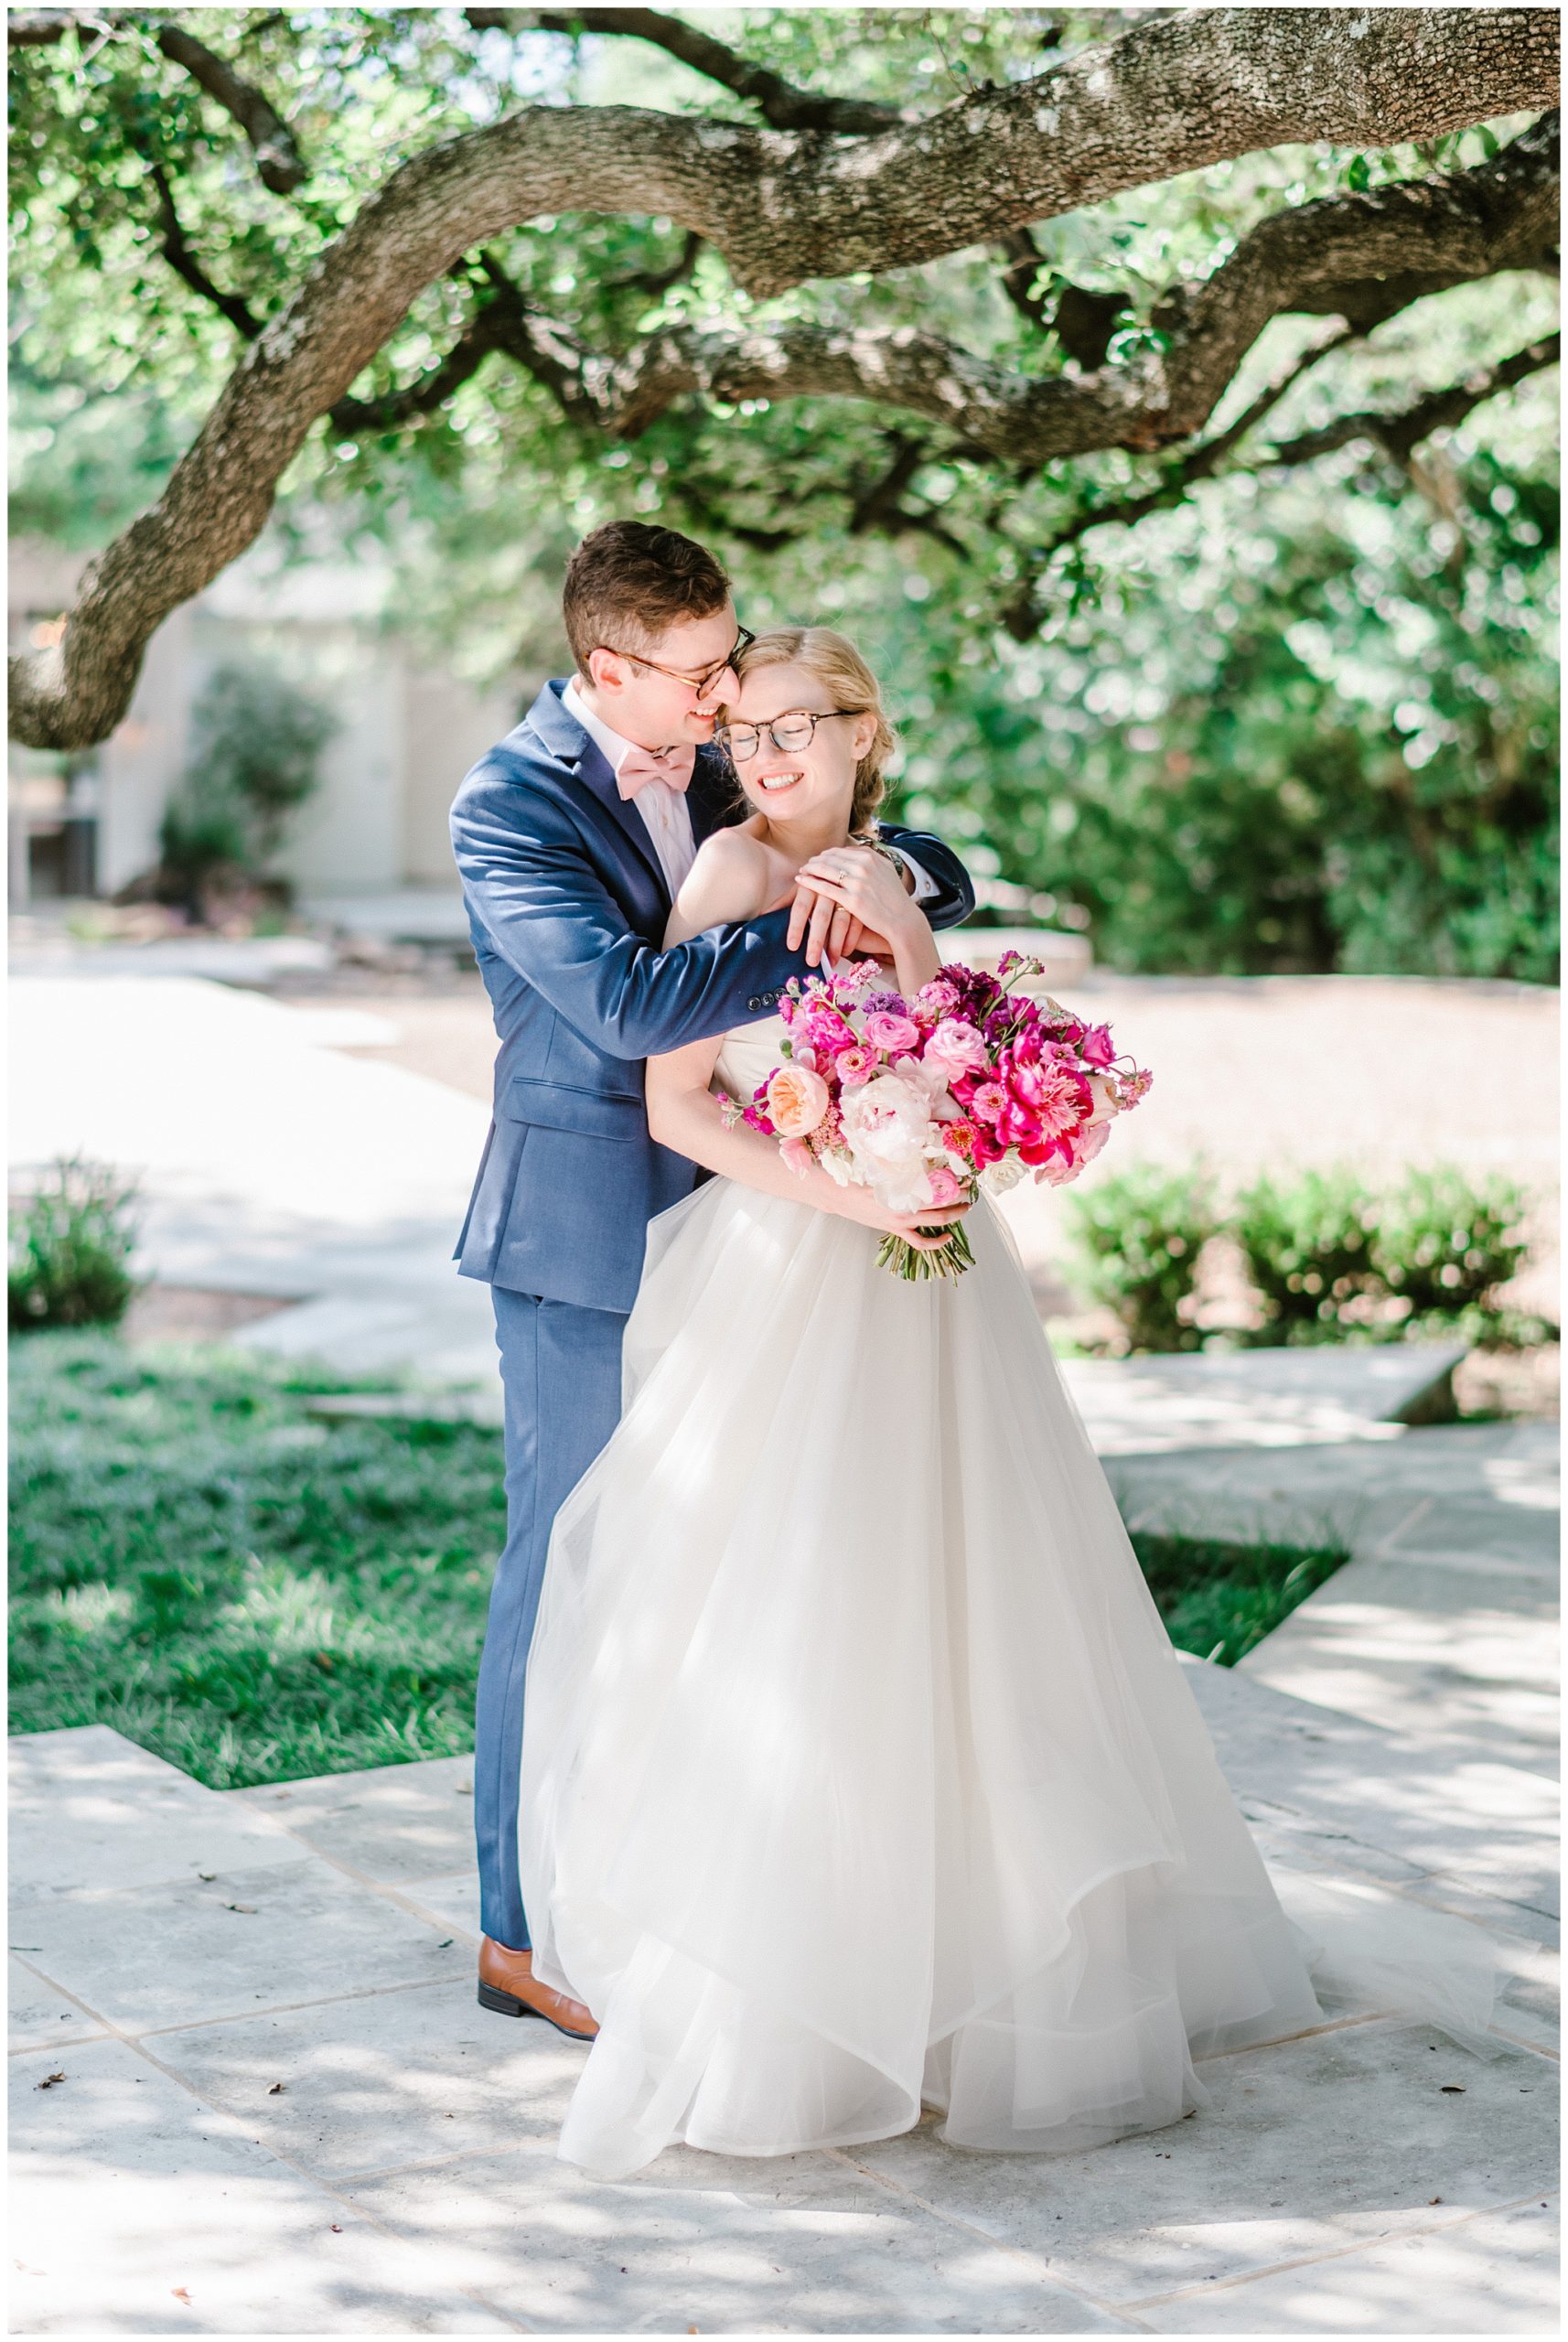 Beautiful couple wedding portraits with bright florals in soft light